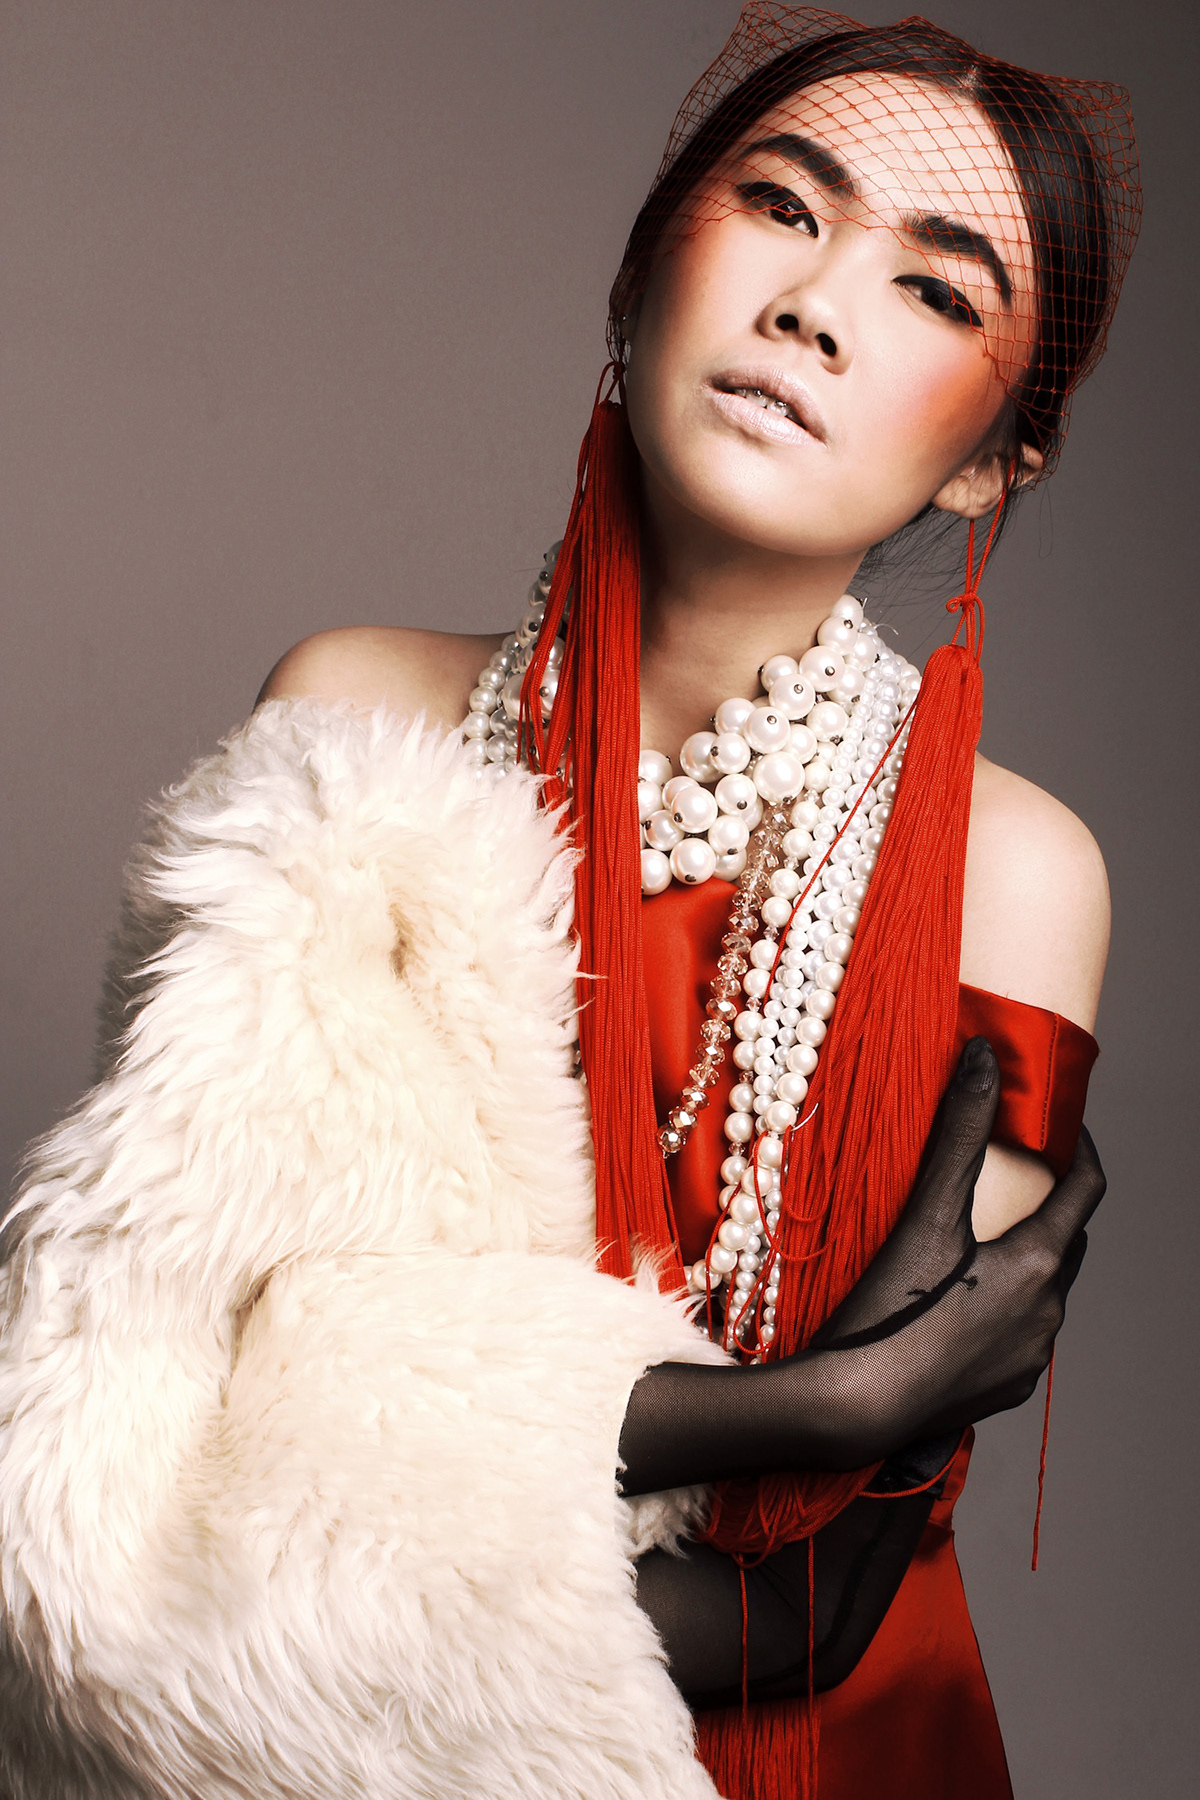 lasalle college beauty twenty stylist photo vogue indonesia asia south east